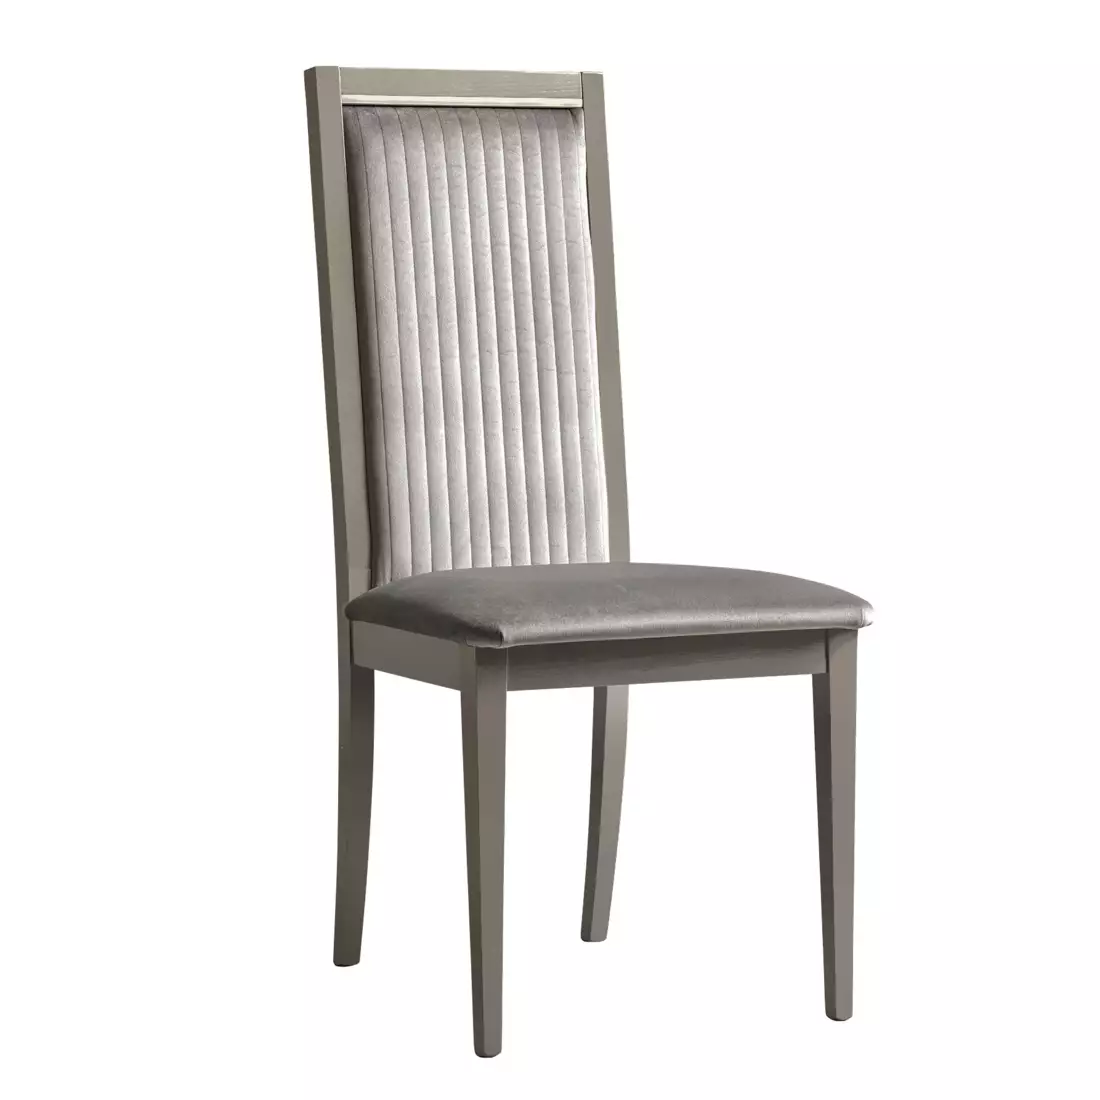 CHAIR-ROMA-STRIPE-FRONT